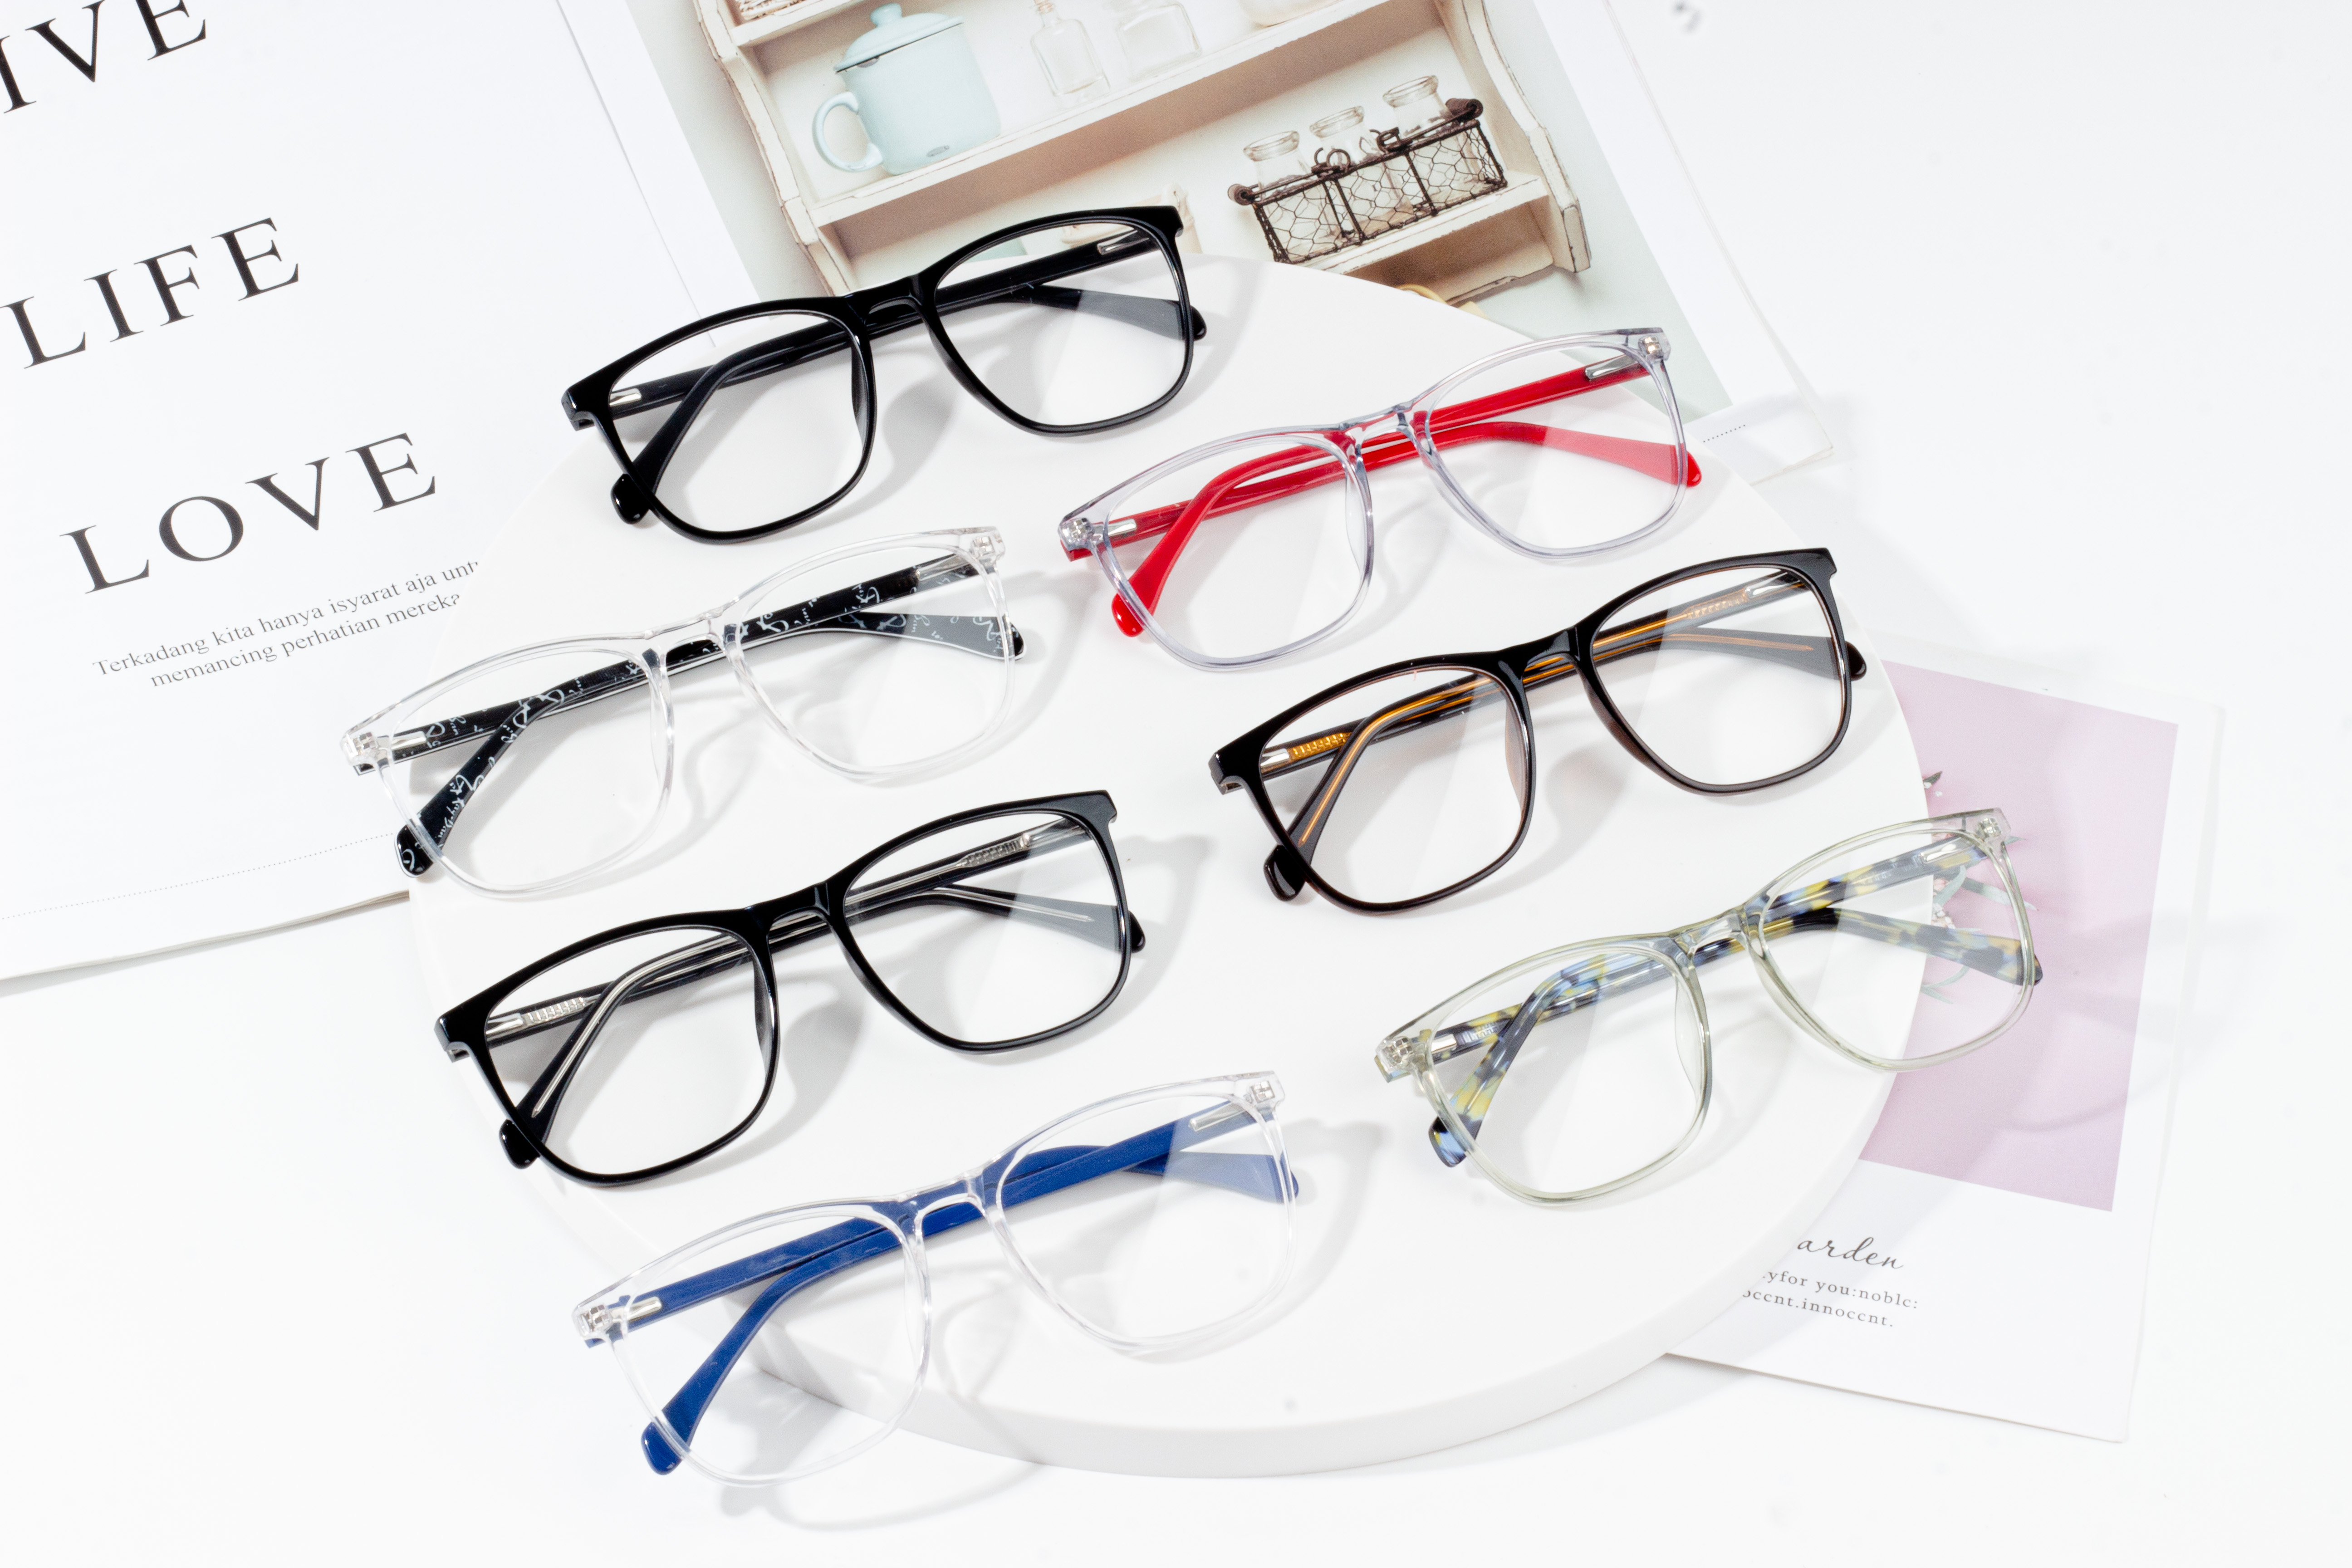 TR90 frame and acetate frame, do you know which one is better?